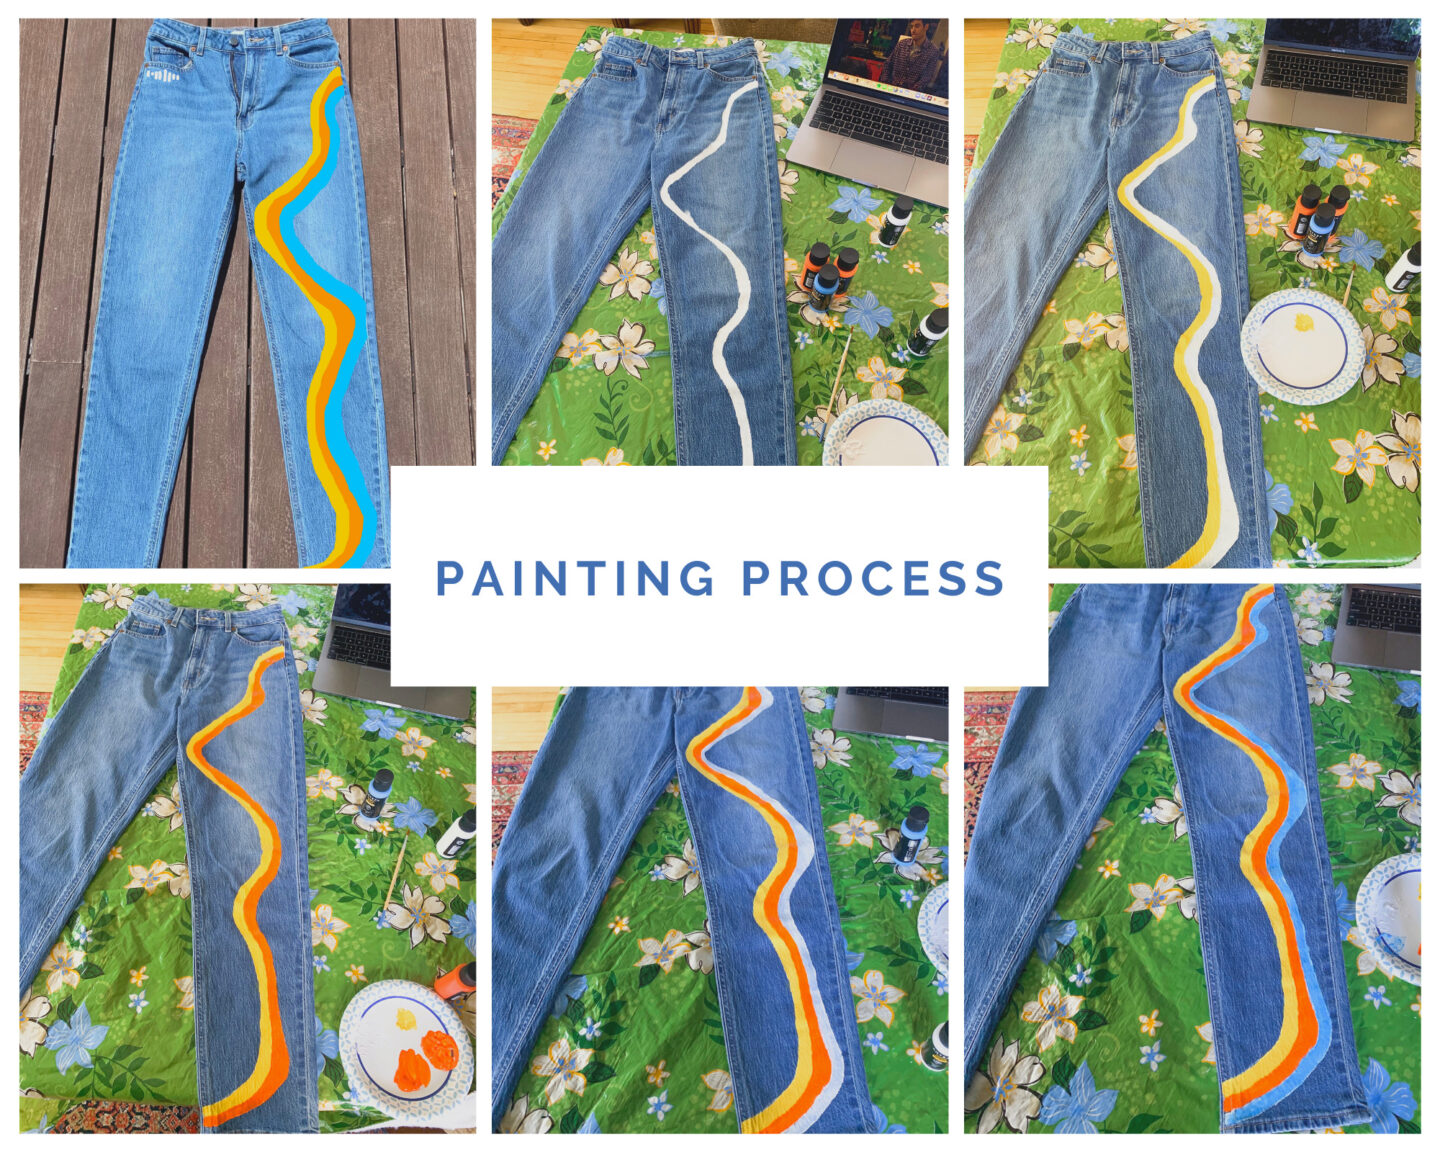 Photo collage of jeans to show the painting process adding more stripes of color each time.